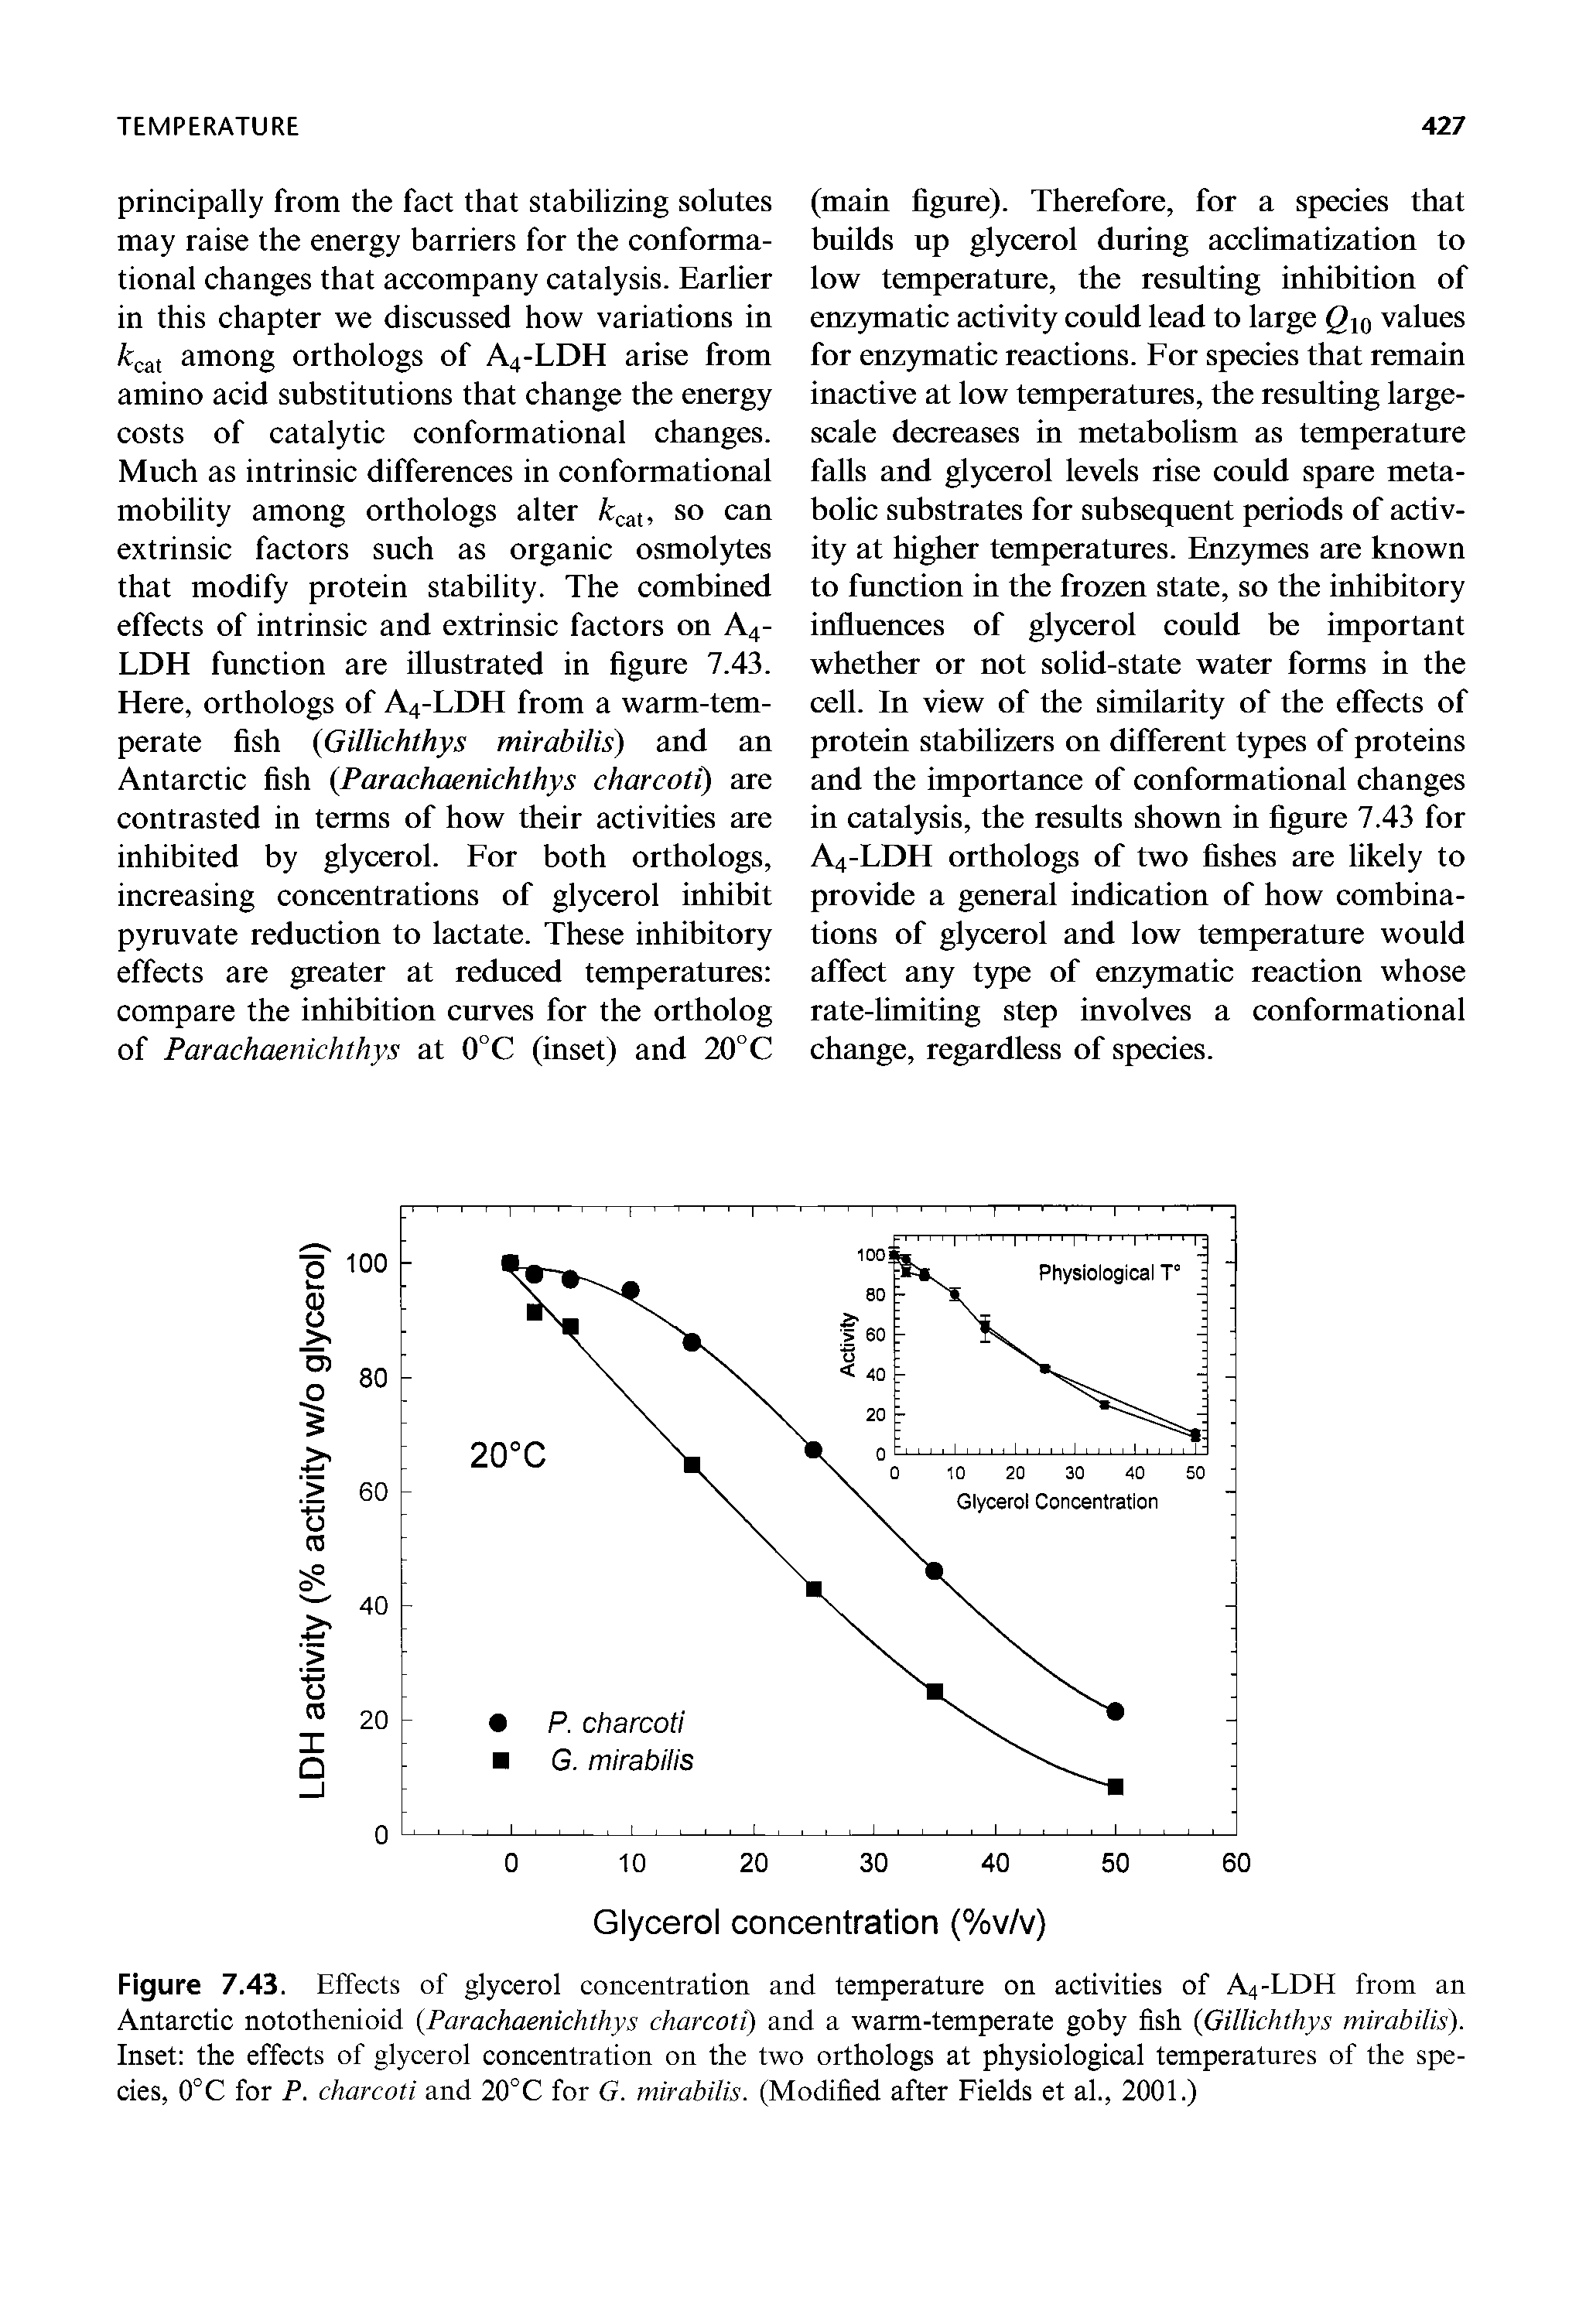 Figure 7.43. Effects of glycerol concentration and temperature on activities of A4-LDH from an Antarctic notothenioid (Parachaenichthys charcoti) and a warm-temperate goby fish (Gillichthys mirabilis). Inset the effects of glycerol concentration on the two orthologs at physiological temperatures of the species, 0°C for P. charcoti and 20°C for G. mirabilis. (Modified after Fields et al., 2001.)...